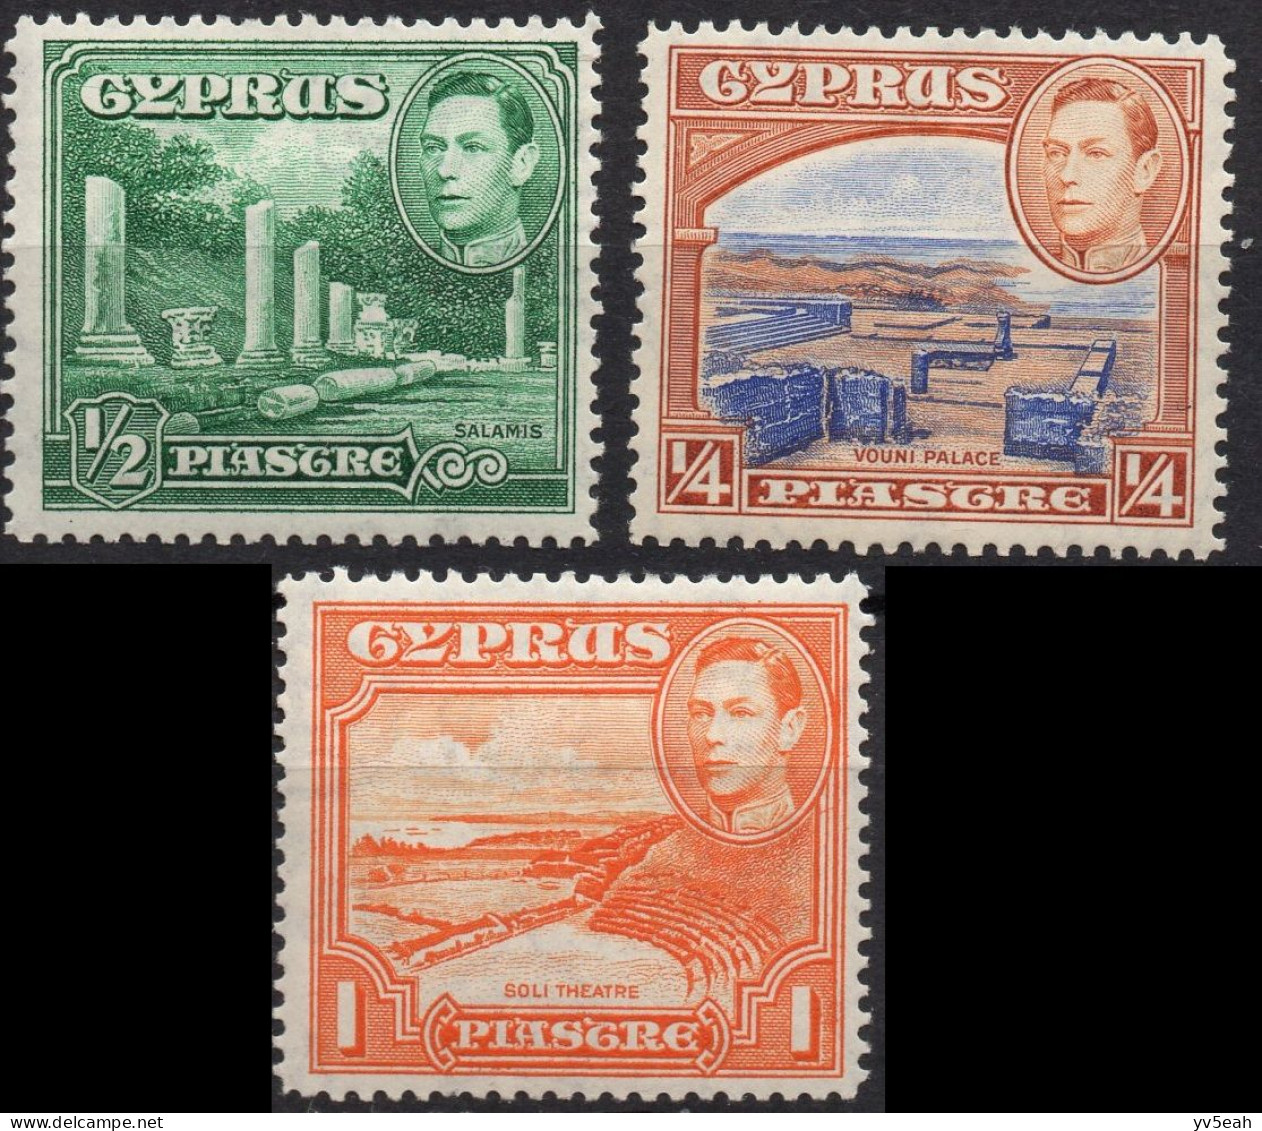 CYPRUS/1938-44/MH/SC#143-4, 146/ OLD ARCHITECTURE / BUILDINGS / PICTORIAL / KING GEORGE VI / KGVI / PARTIAL SET - Zypern (...-1960)